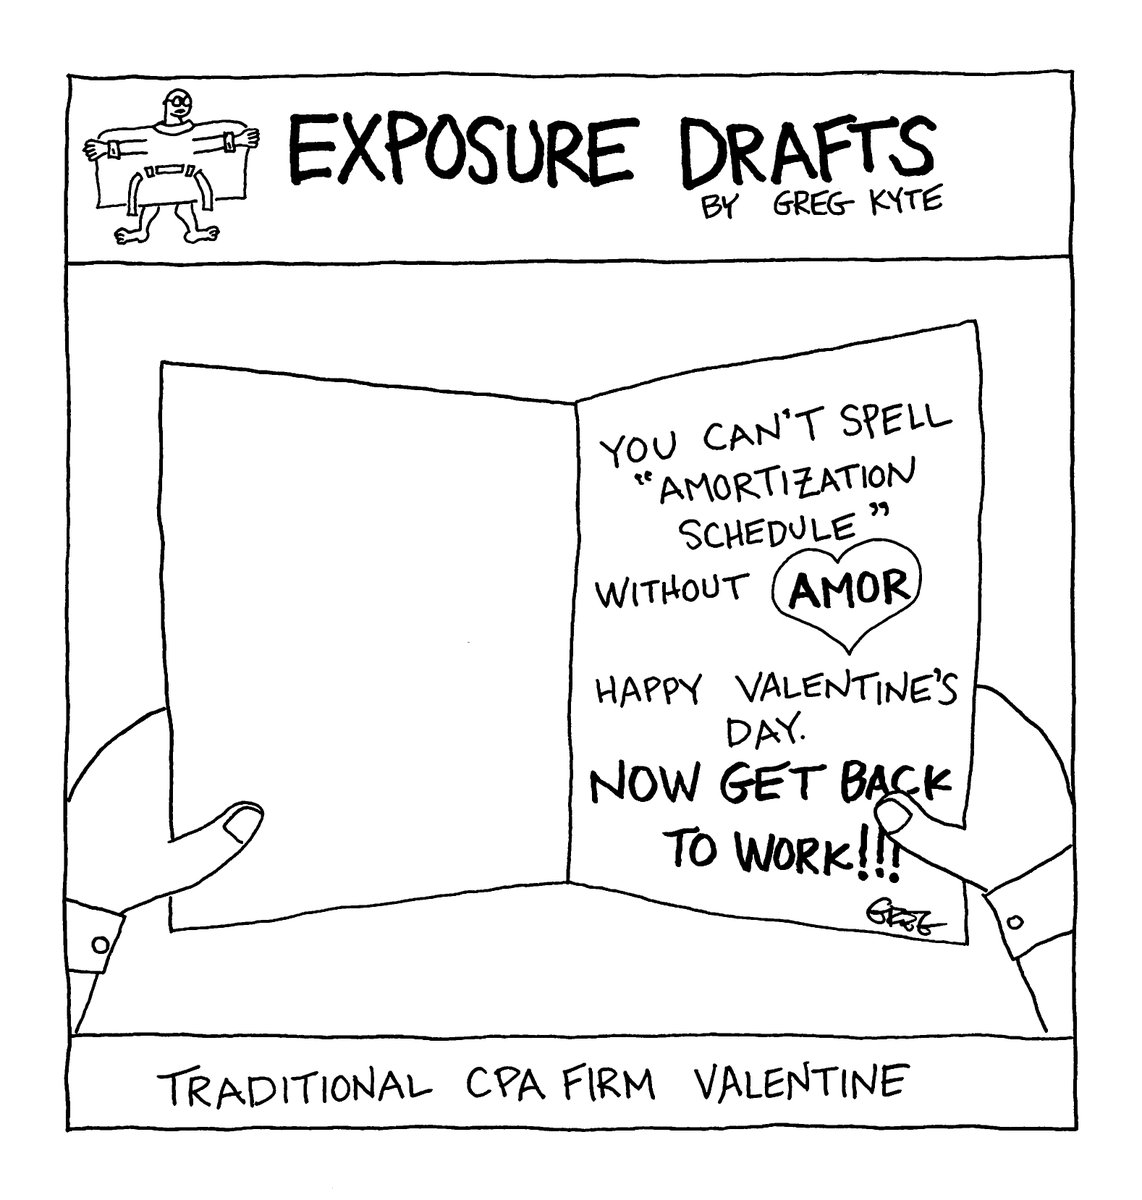 It's not true that we accountants don't have the capacity for love. We don't have the time for it. #HappyValentinesDay! Now get back to work!

You can find actual traditional CPA firm greeting cards at @RuBookCreative!

#TaxTwitter #AccountingCartoon #ExposureDrafts #busyseason